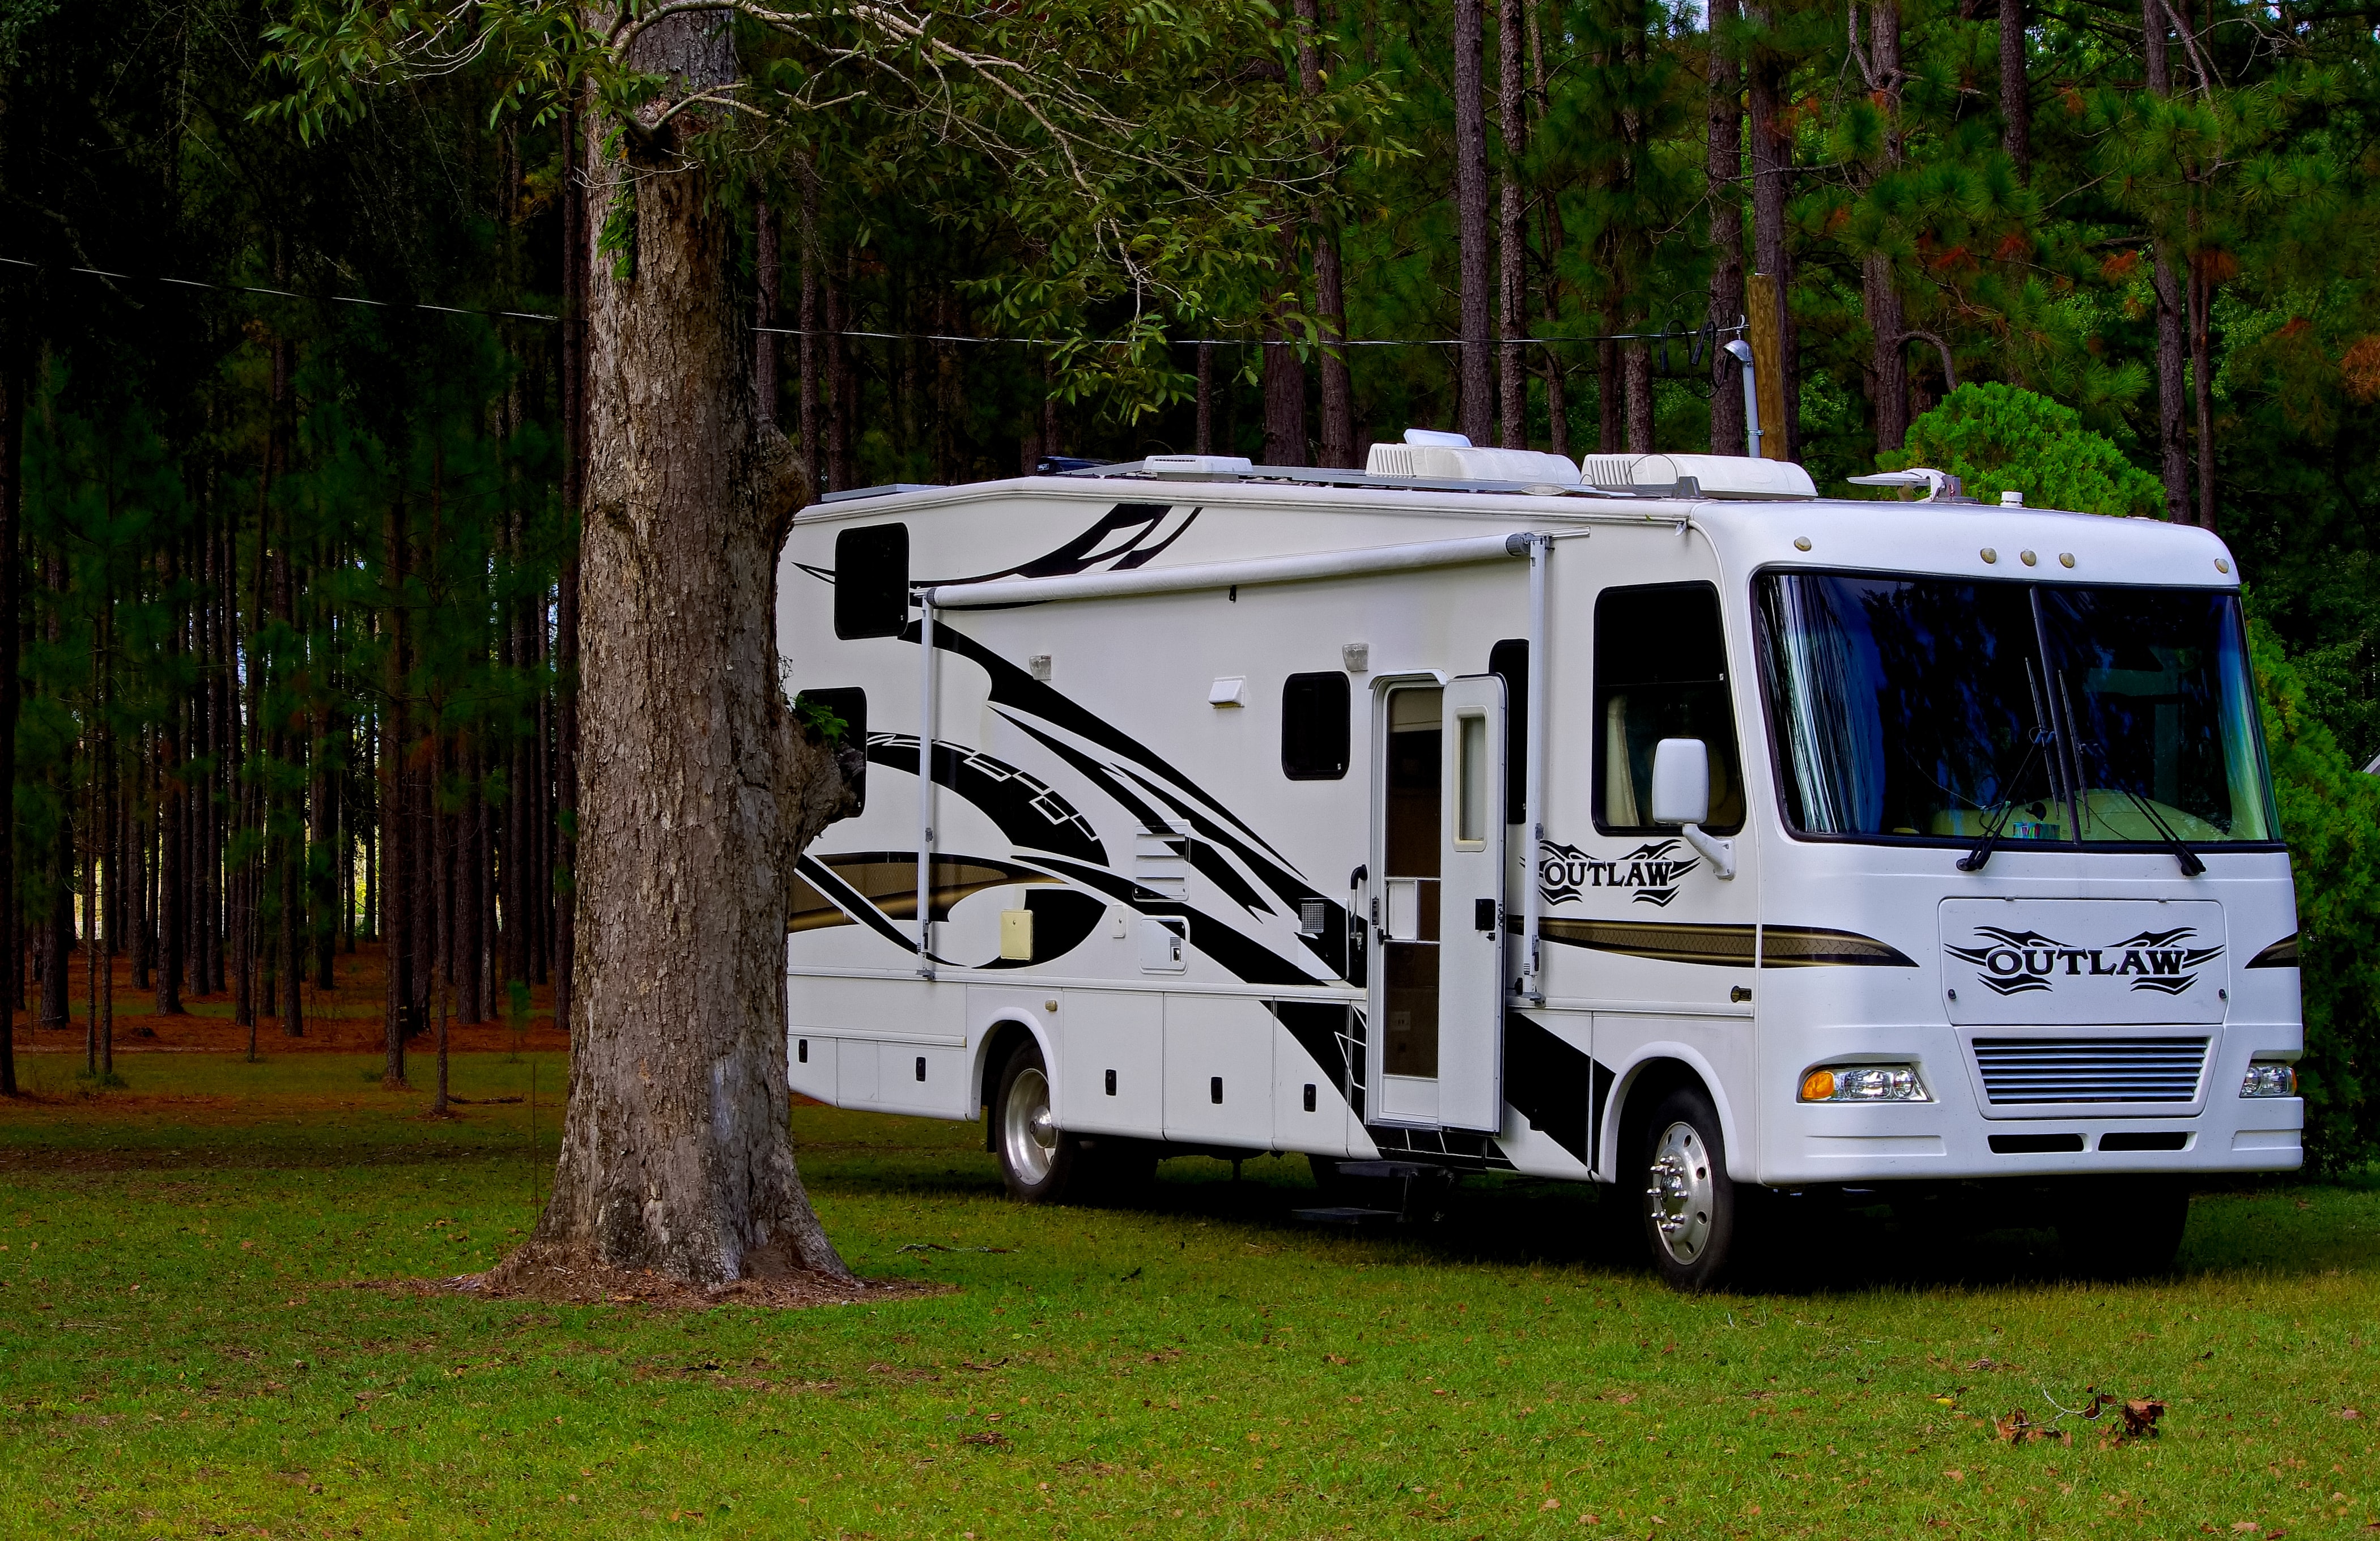 Drivers License Requirements for RV driving by State